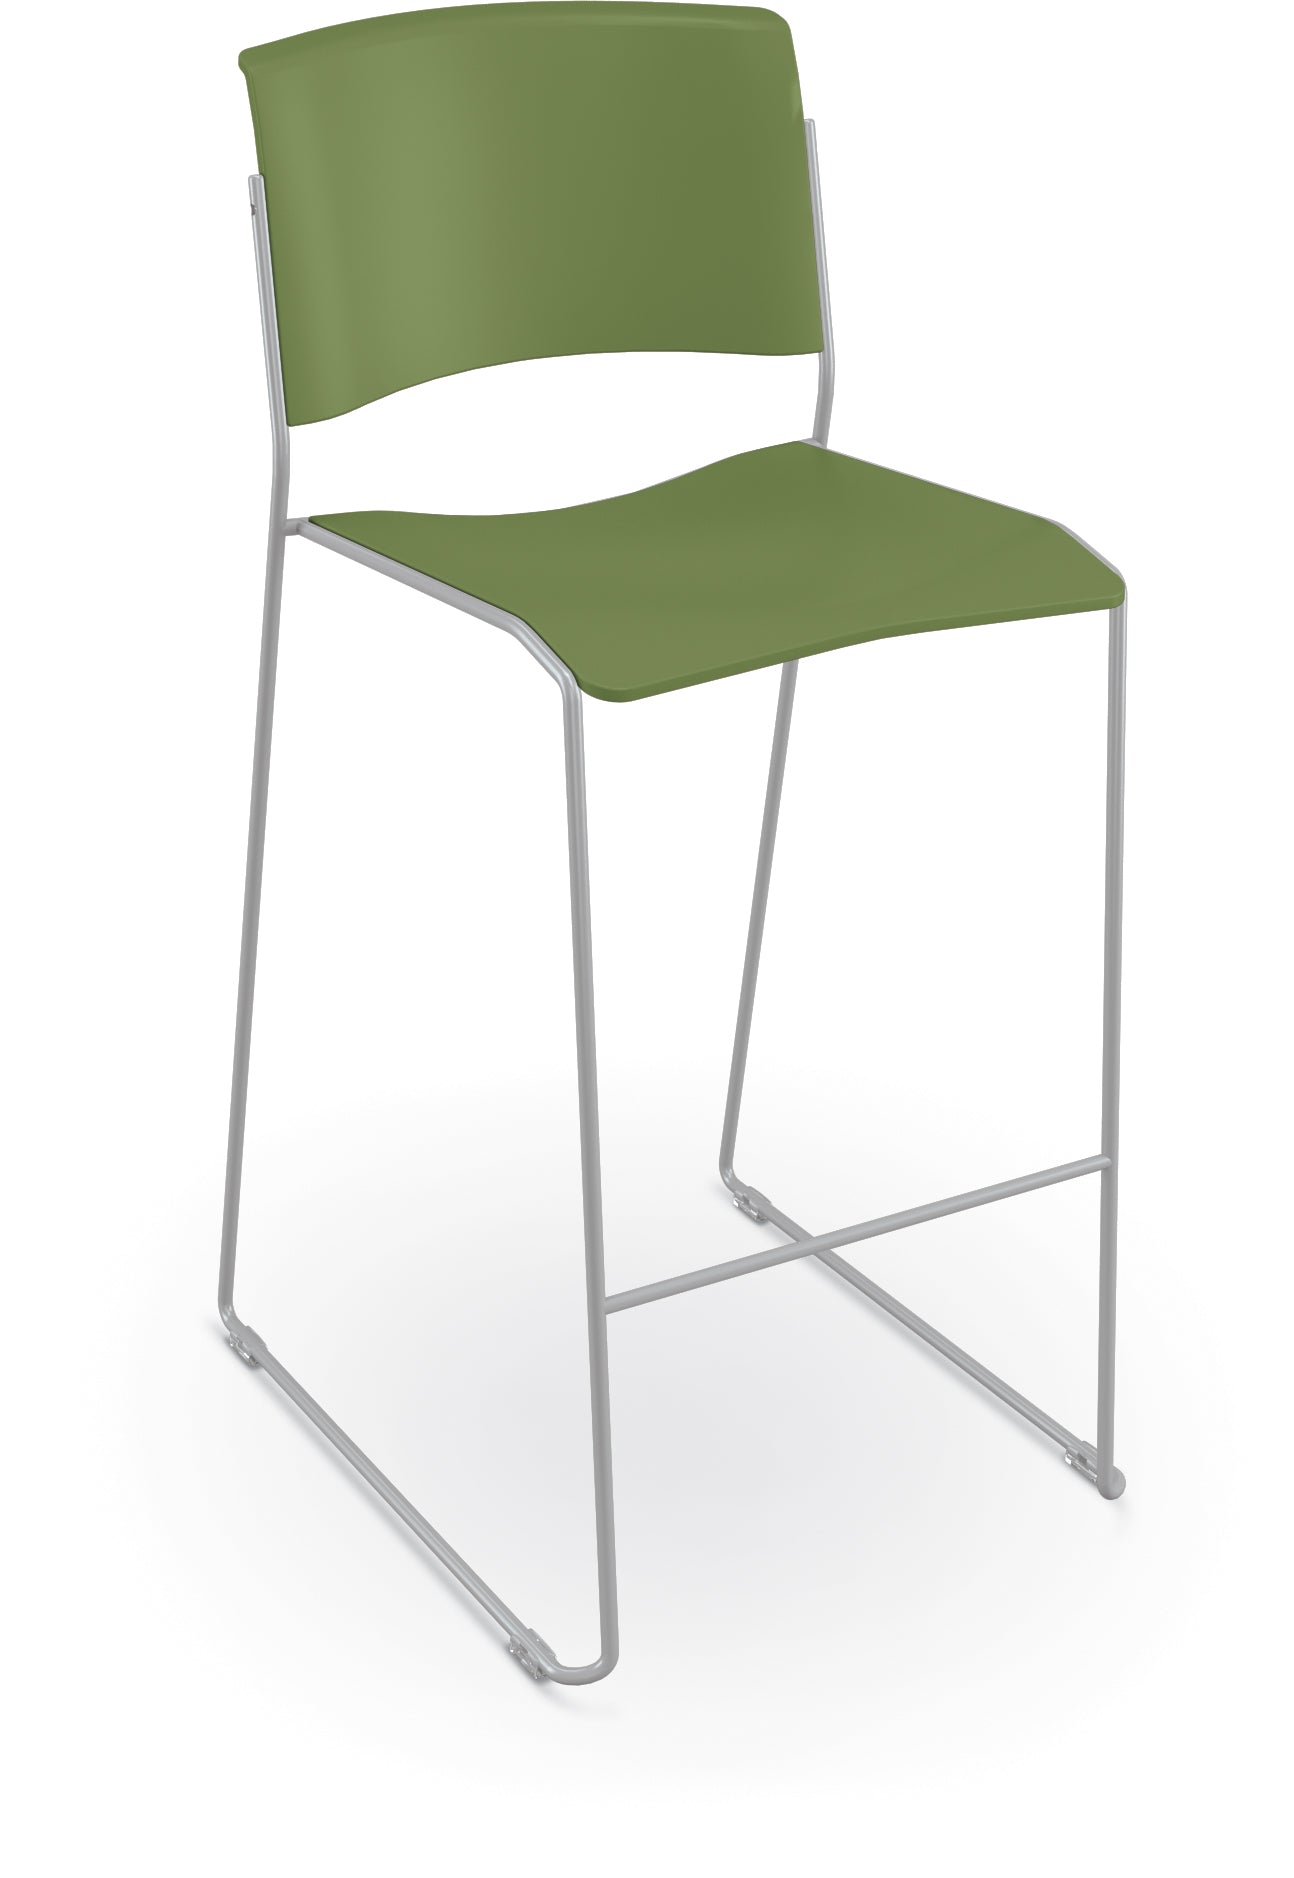 Mooreco Akt Stacking Stool with Wire Frame 29.45" Seat Height - SchoolOutlet